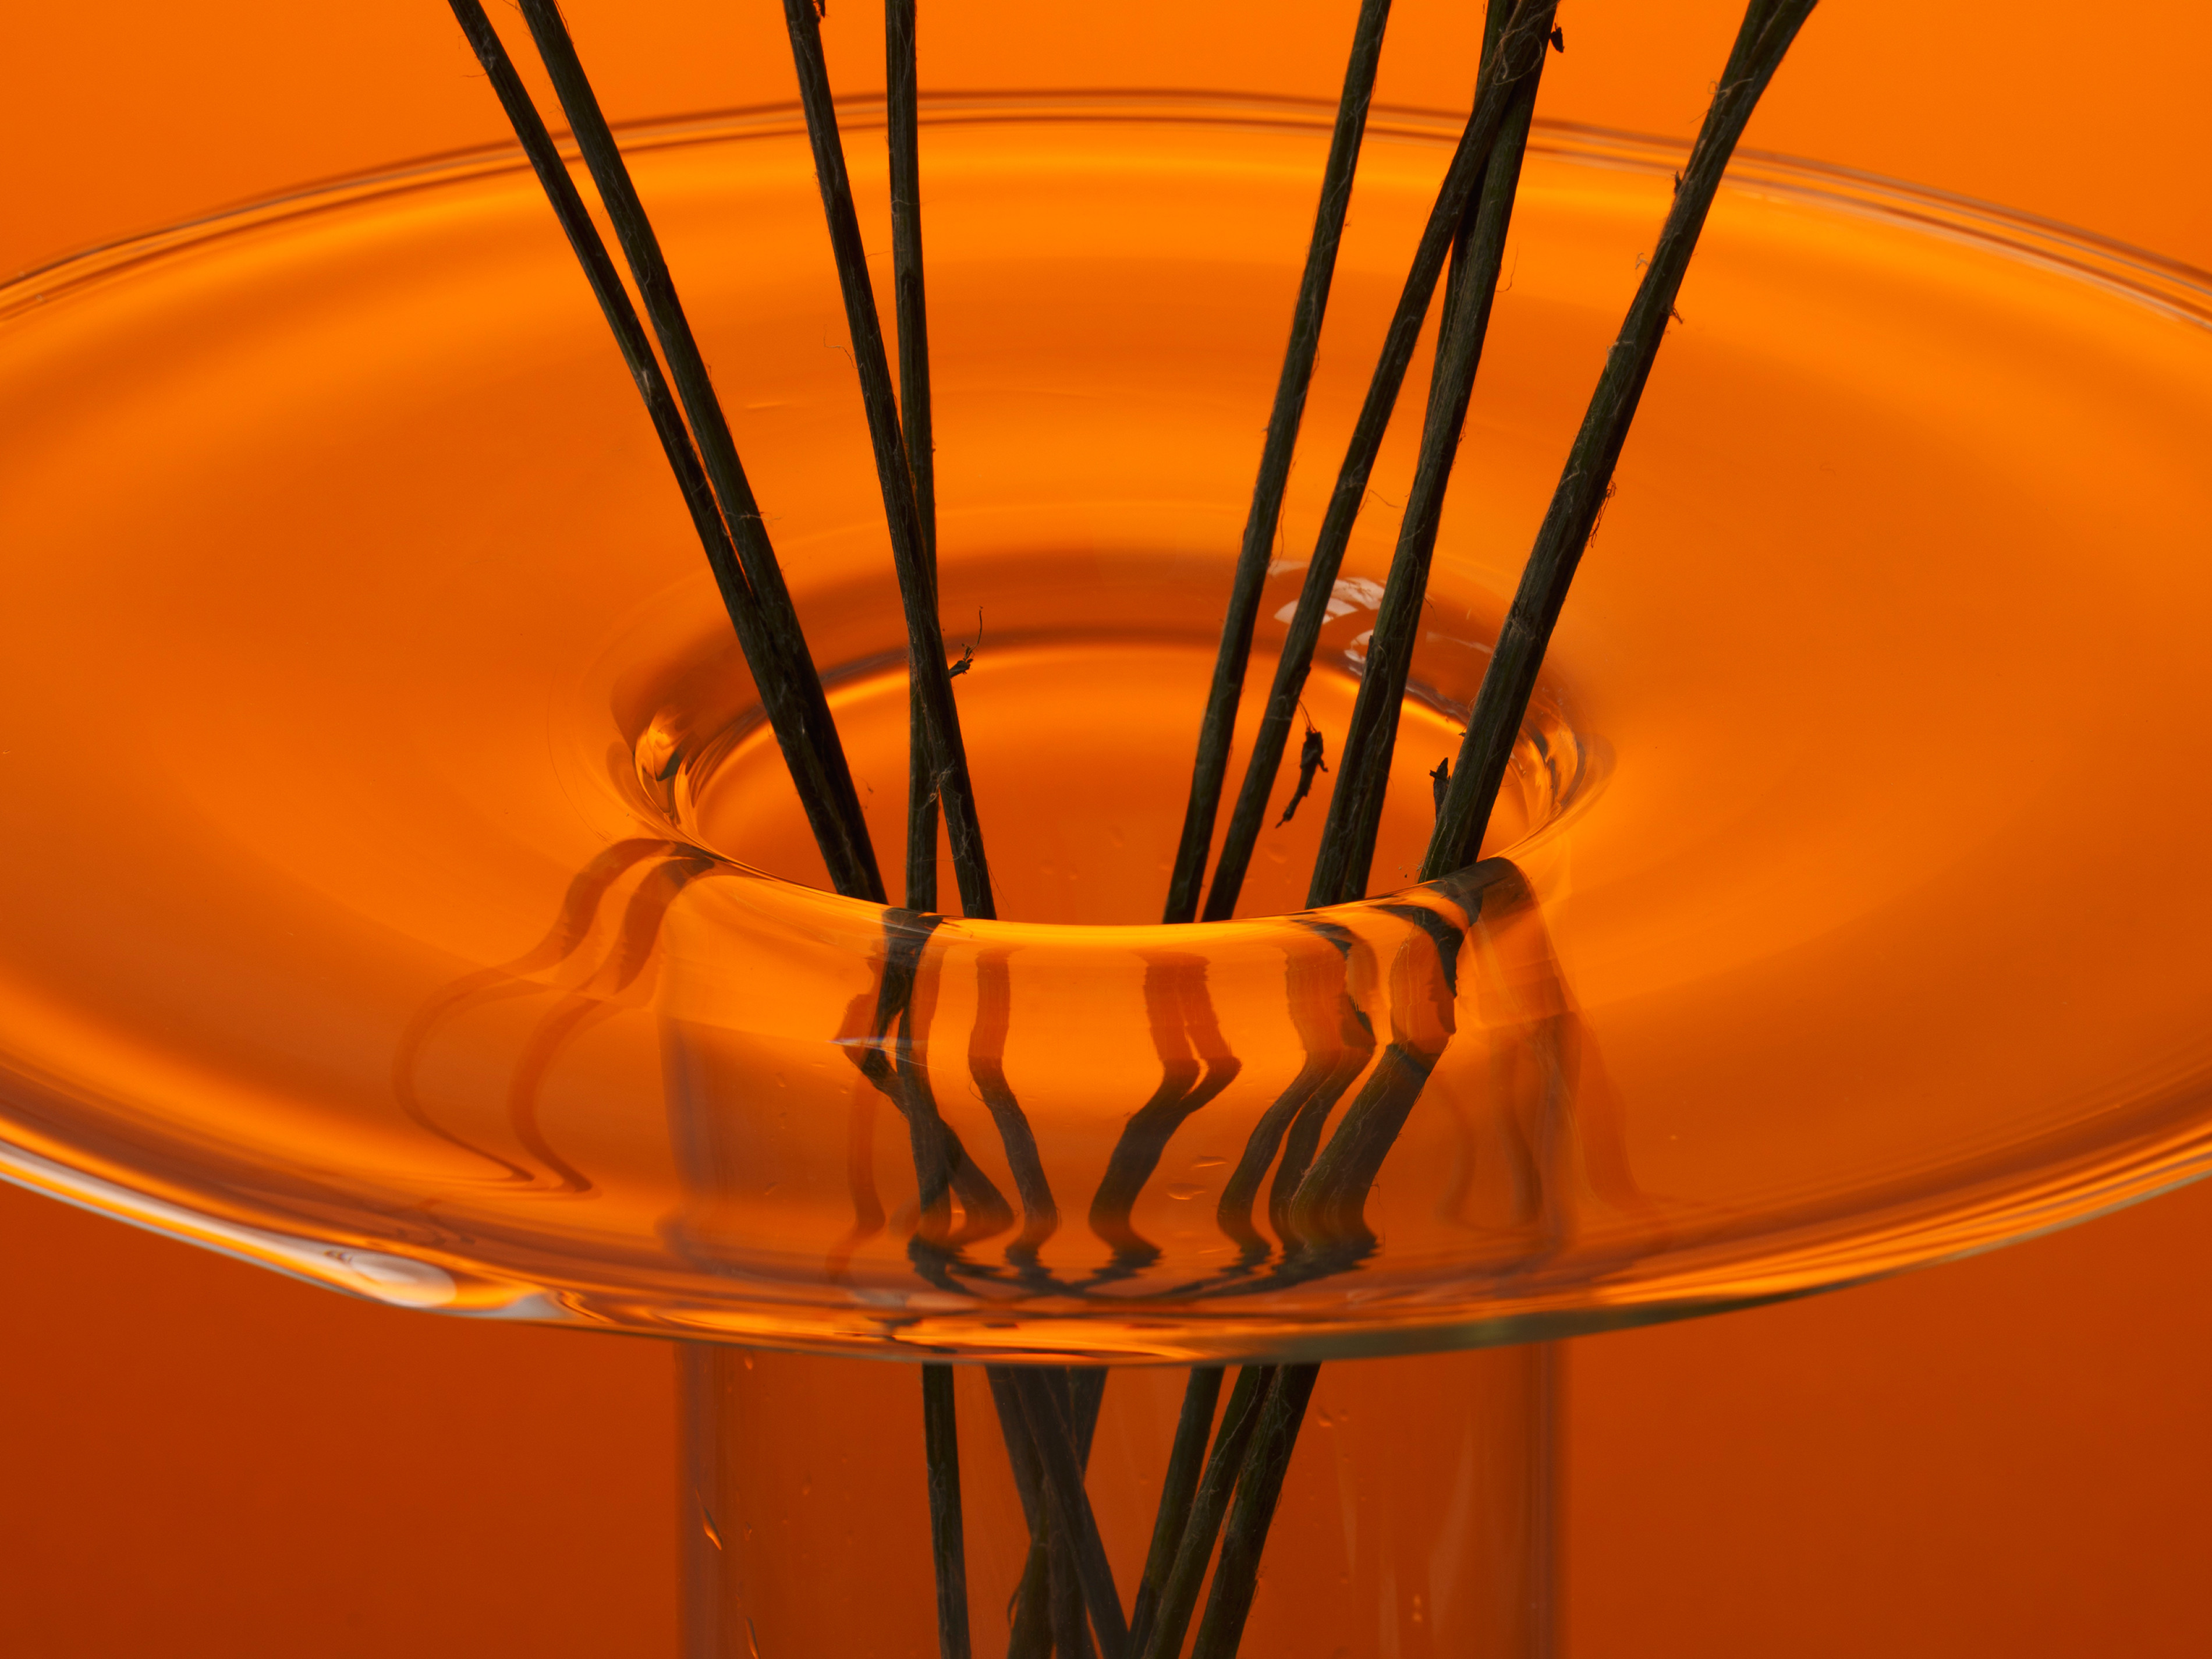 Detail of a glass vase with flowers inside on an orange background